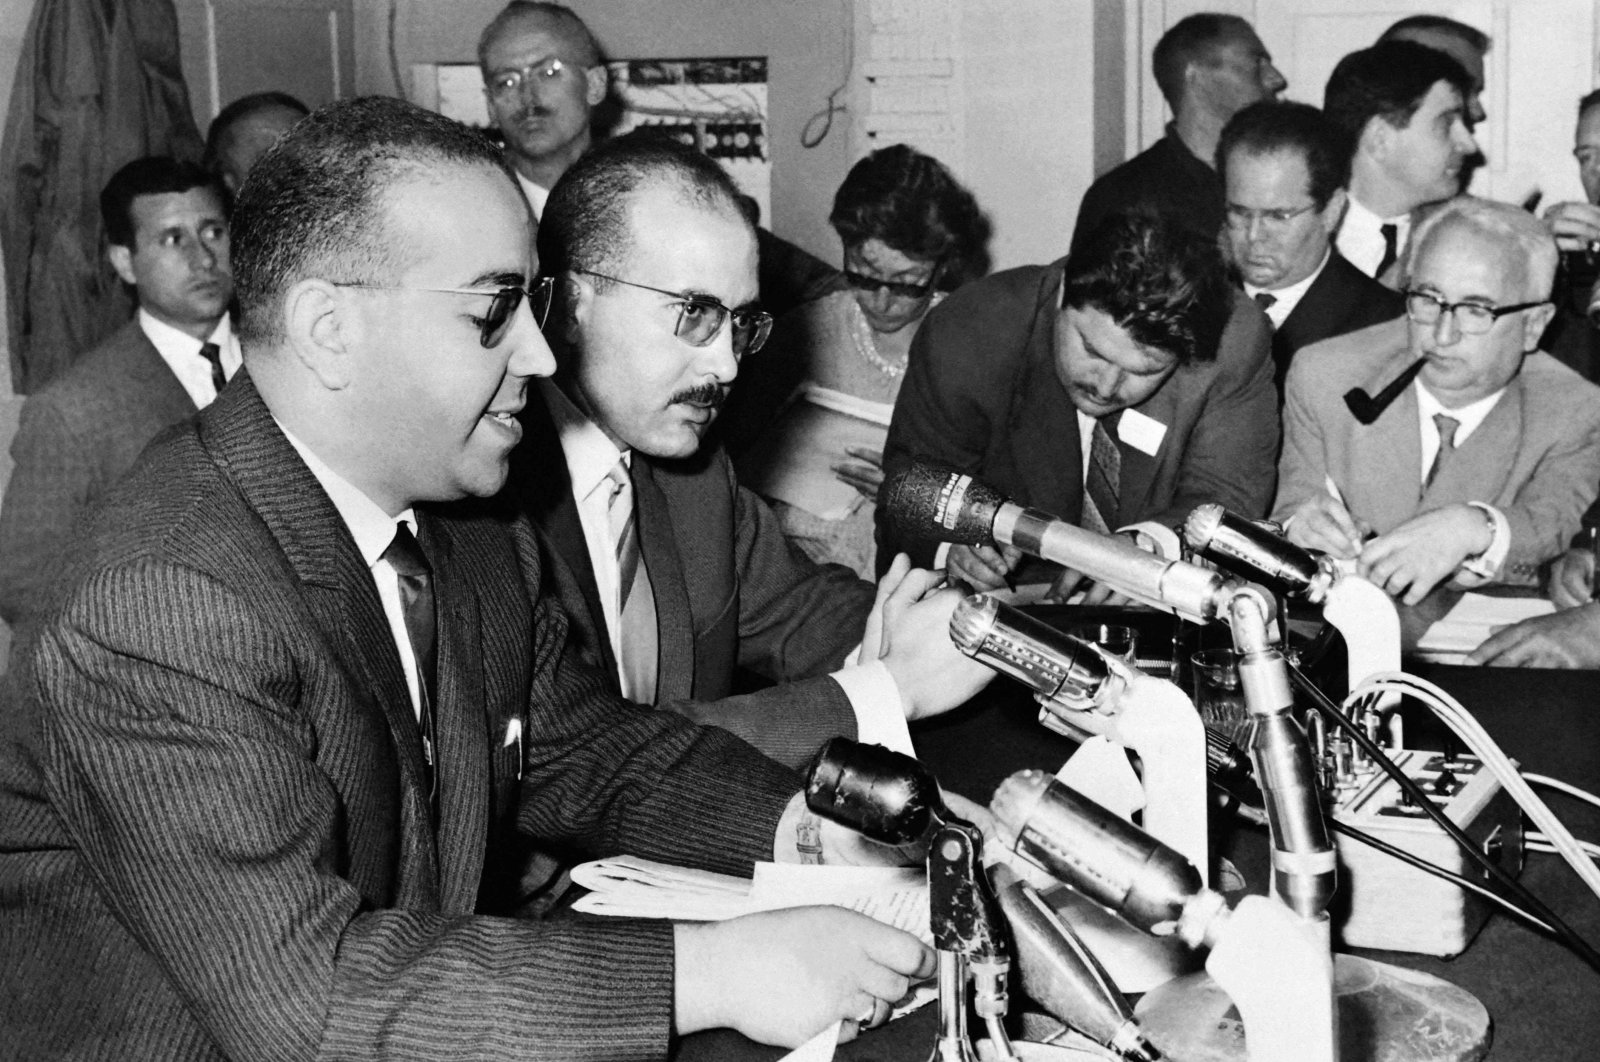 Spokesperson for the Provisional Government of the Algerian Republic (GPRA) delegation and head of the FLN press service Redha Malek (L) and Mahieddine Sadek Moussaoui (R), member of the FLN press service, deliver a press conference, in Geneva, during the negotiations to end war in Algeria, which will lead to the Evian accords, between the French Government and the Provisional Government of the Algerian Republic (GPRA), May 17, 1961. (AFP File Photo)